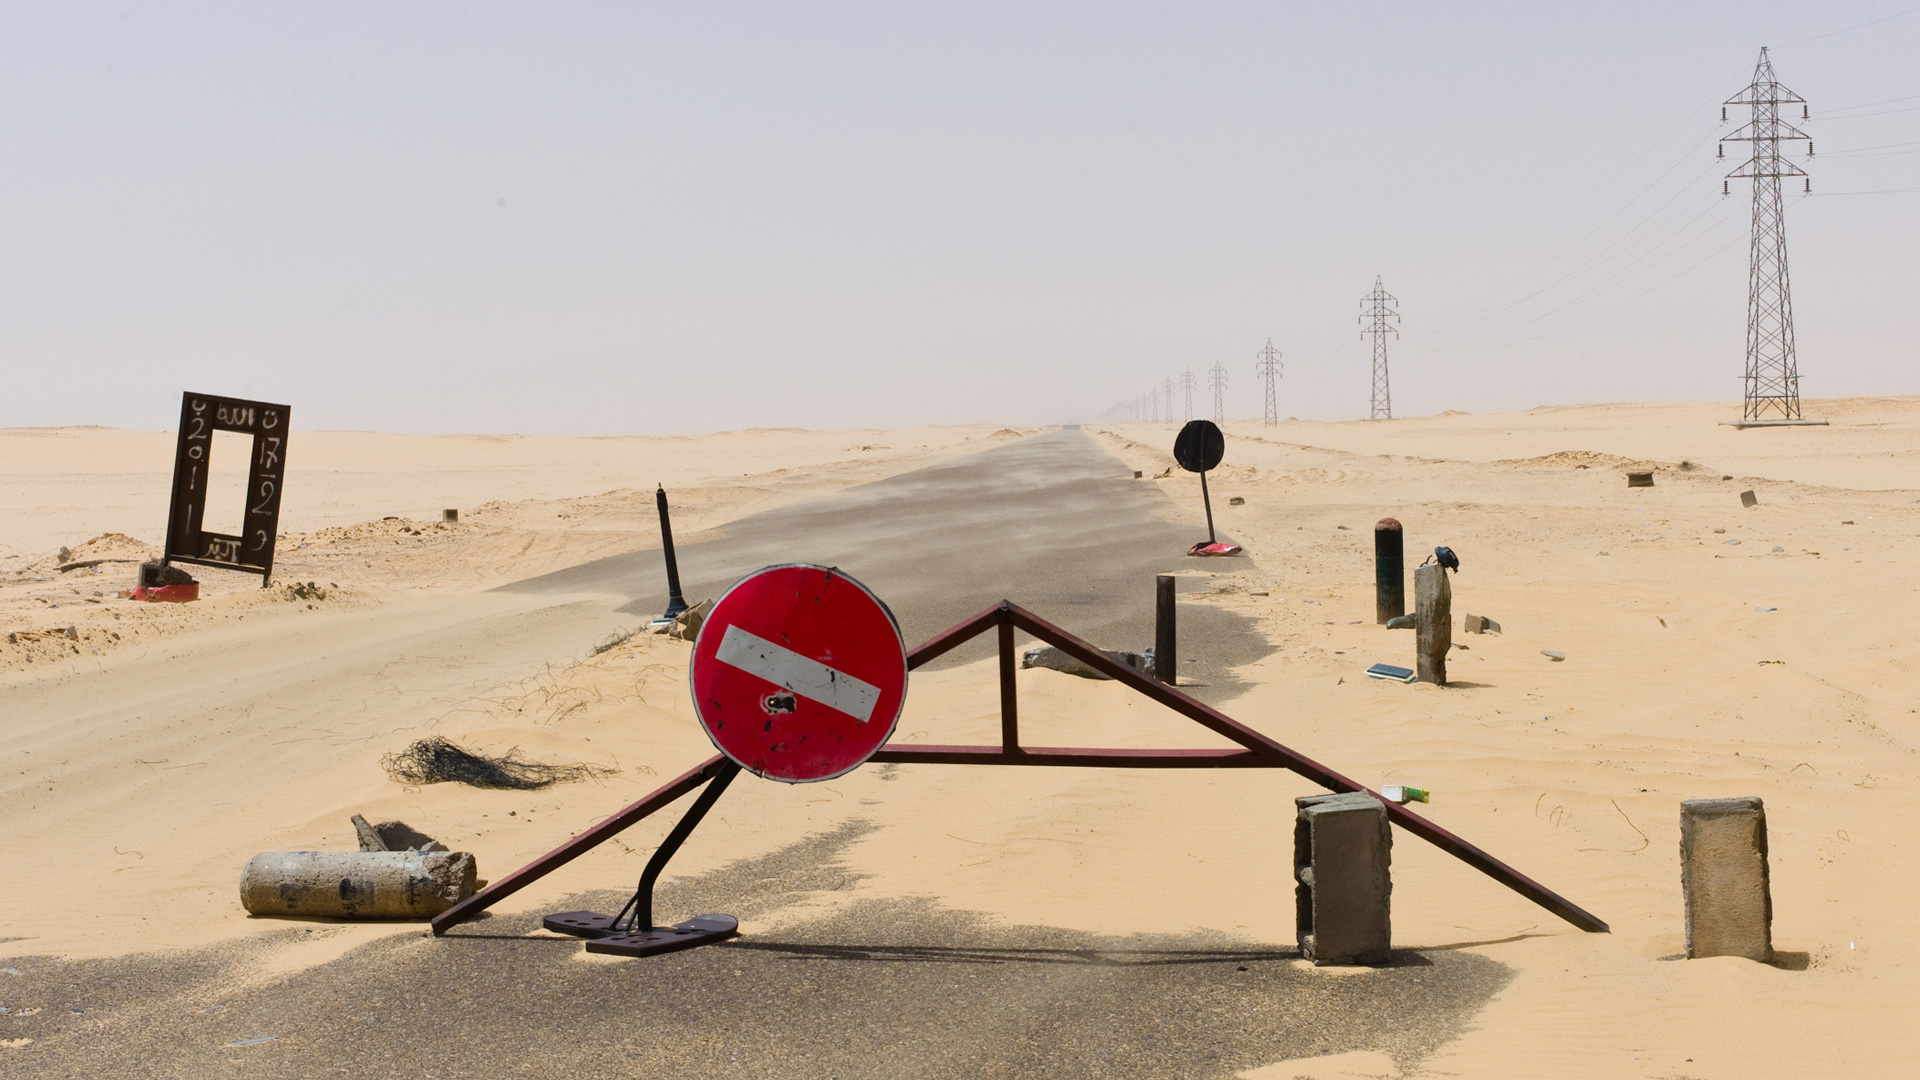 A checkpoint in the desert